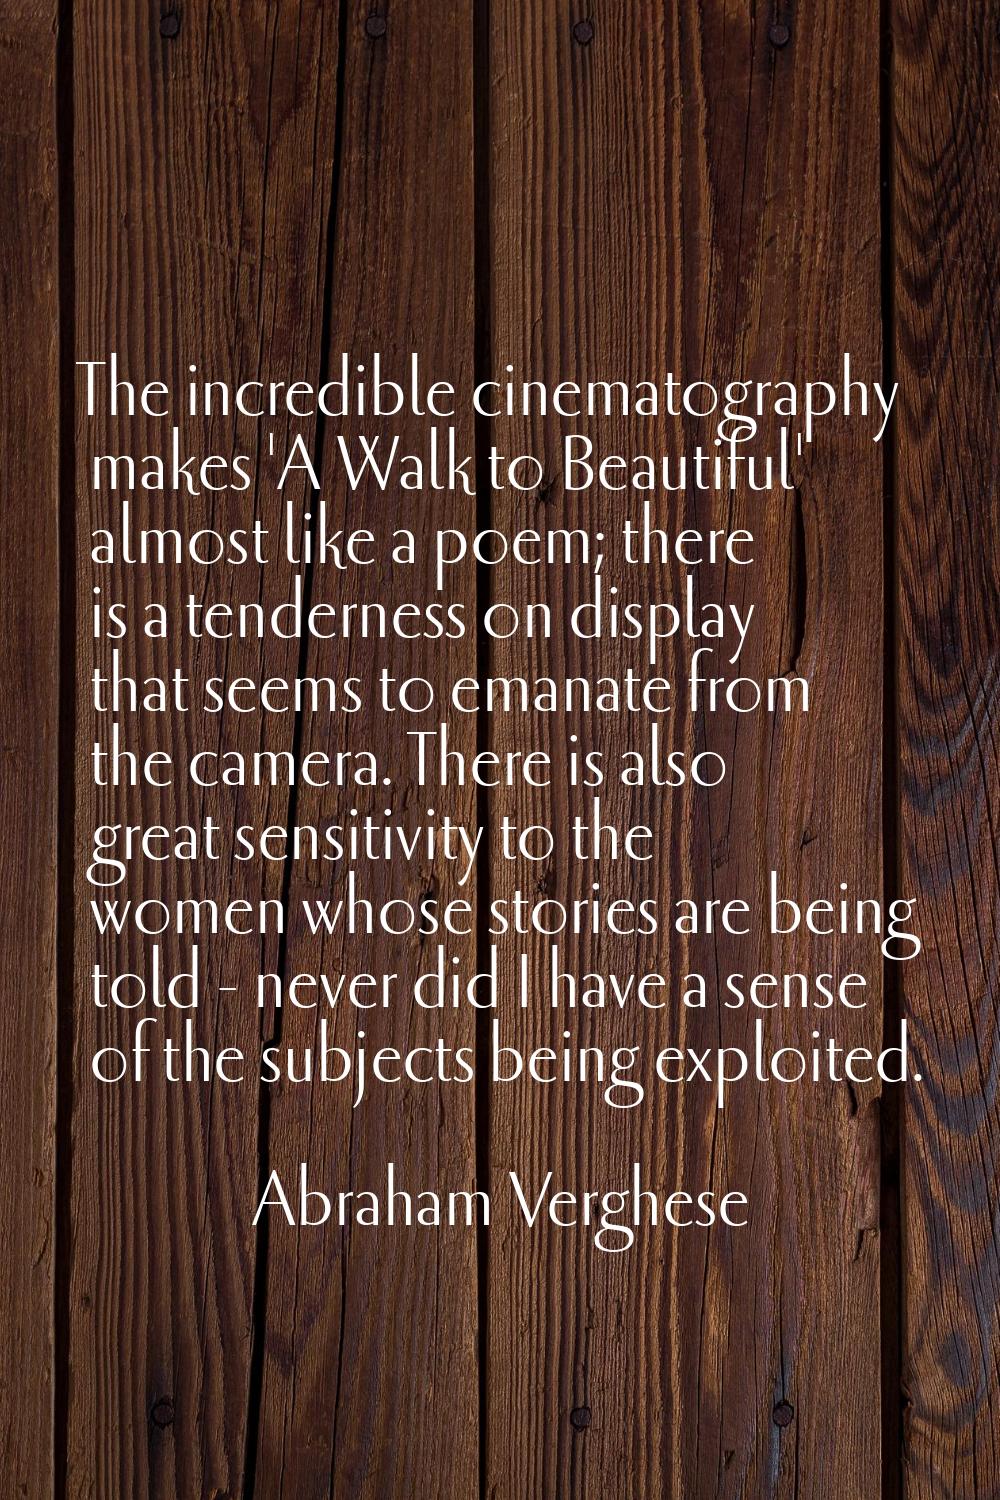 The incredible cinematography makes 'A Walk to Beautiful' almost like a poem; there is a tenderness